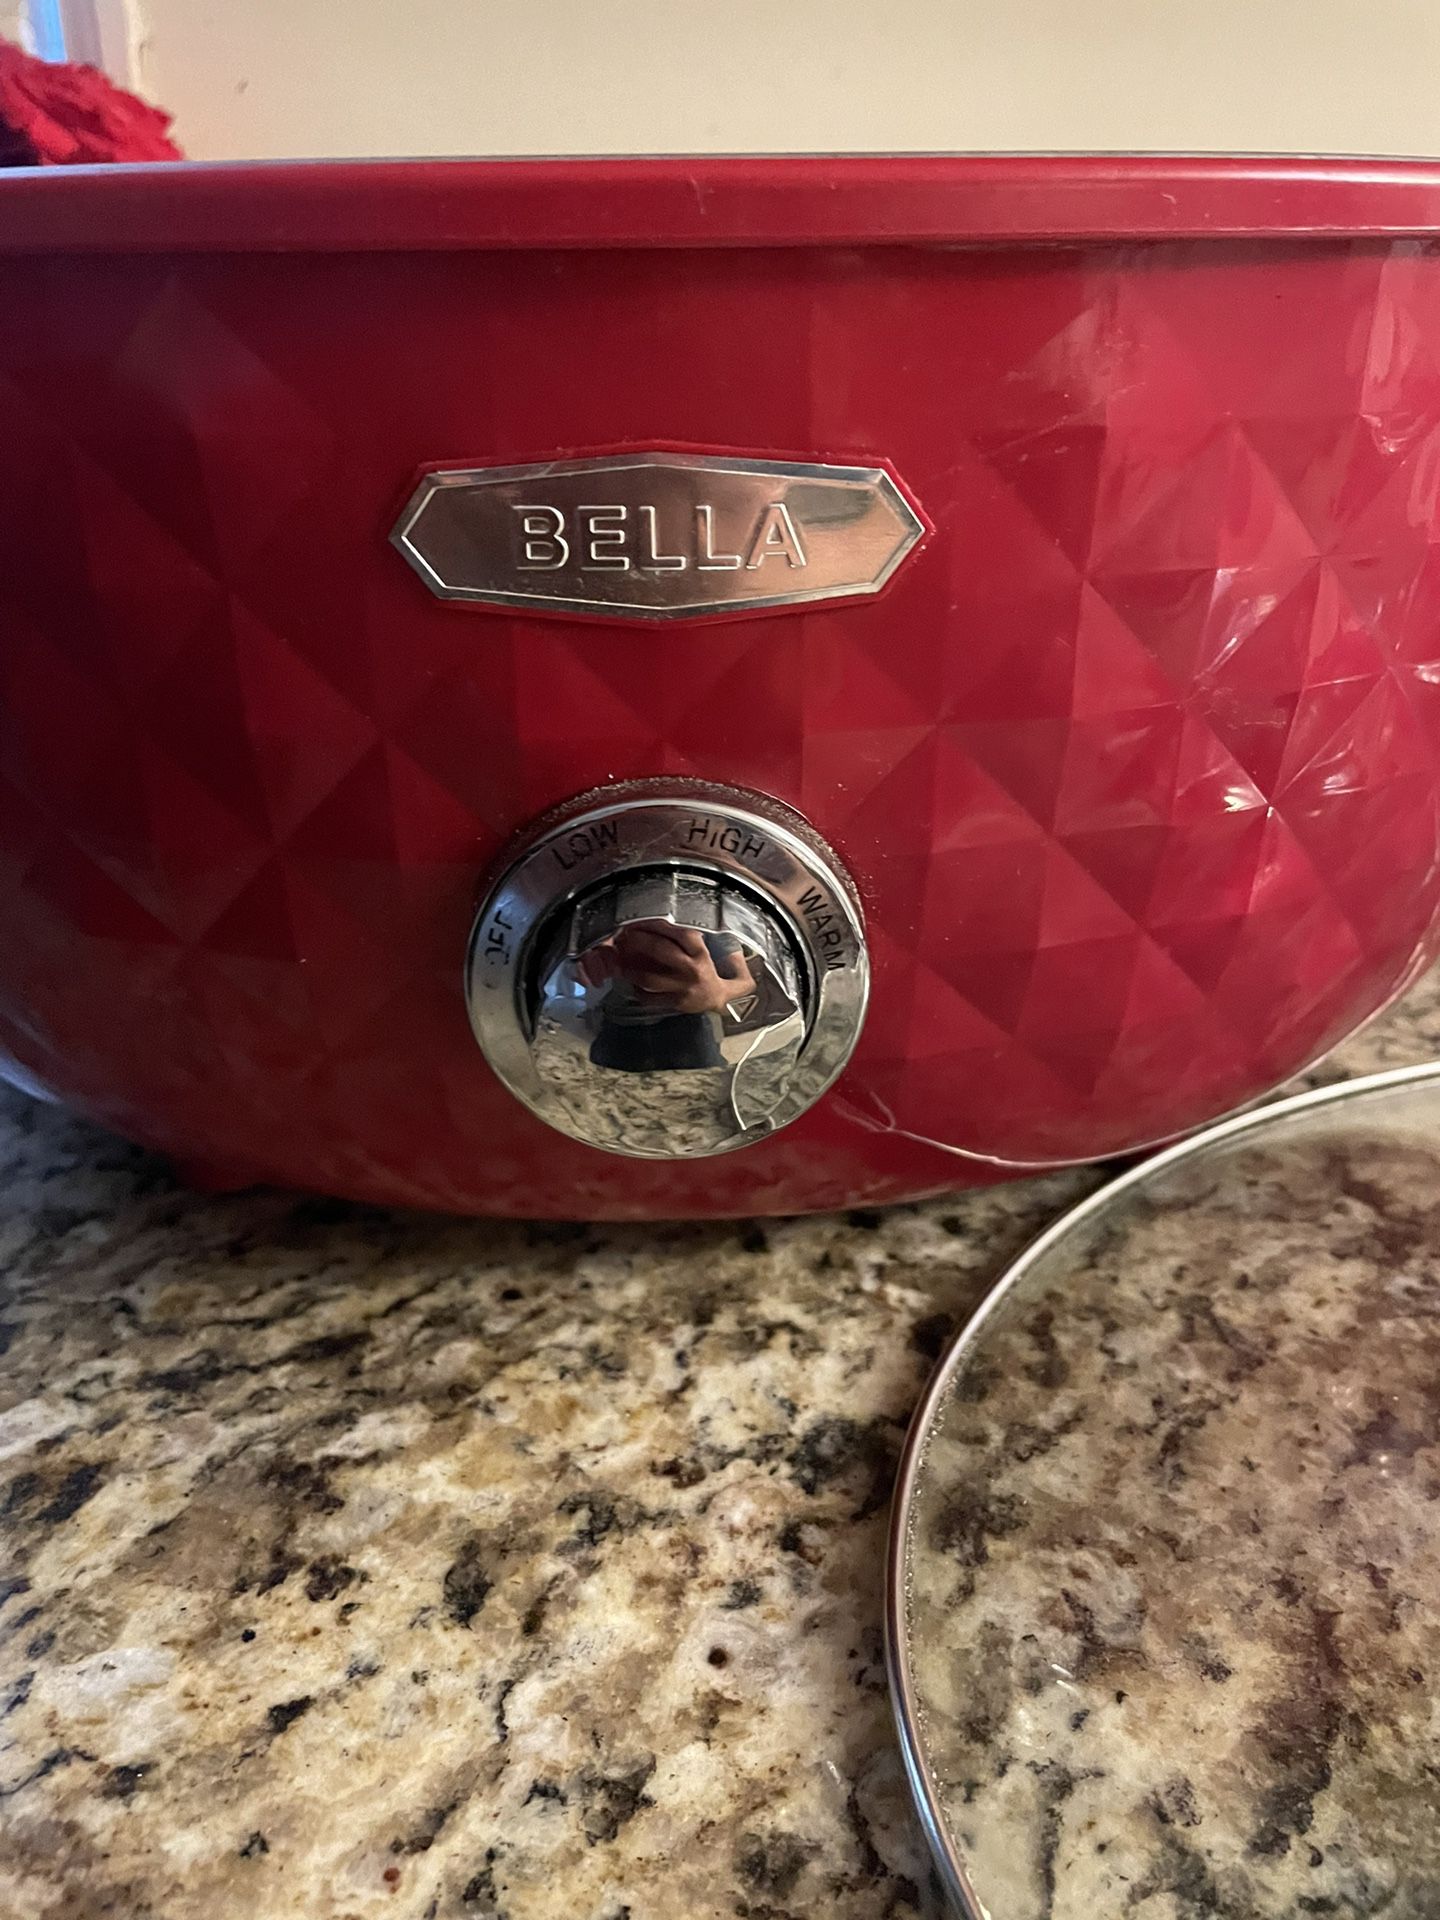 Bella Sensio Slow Cooker for Sale in Thornton, CO - OfferUp